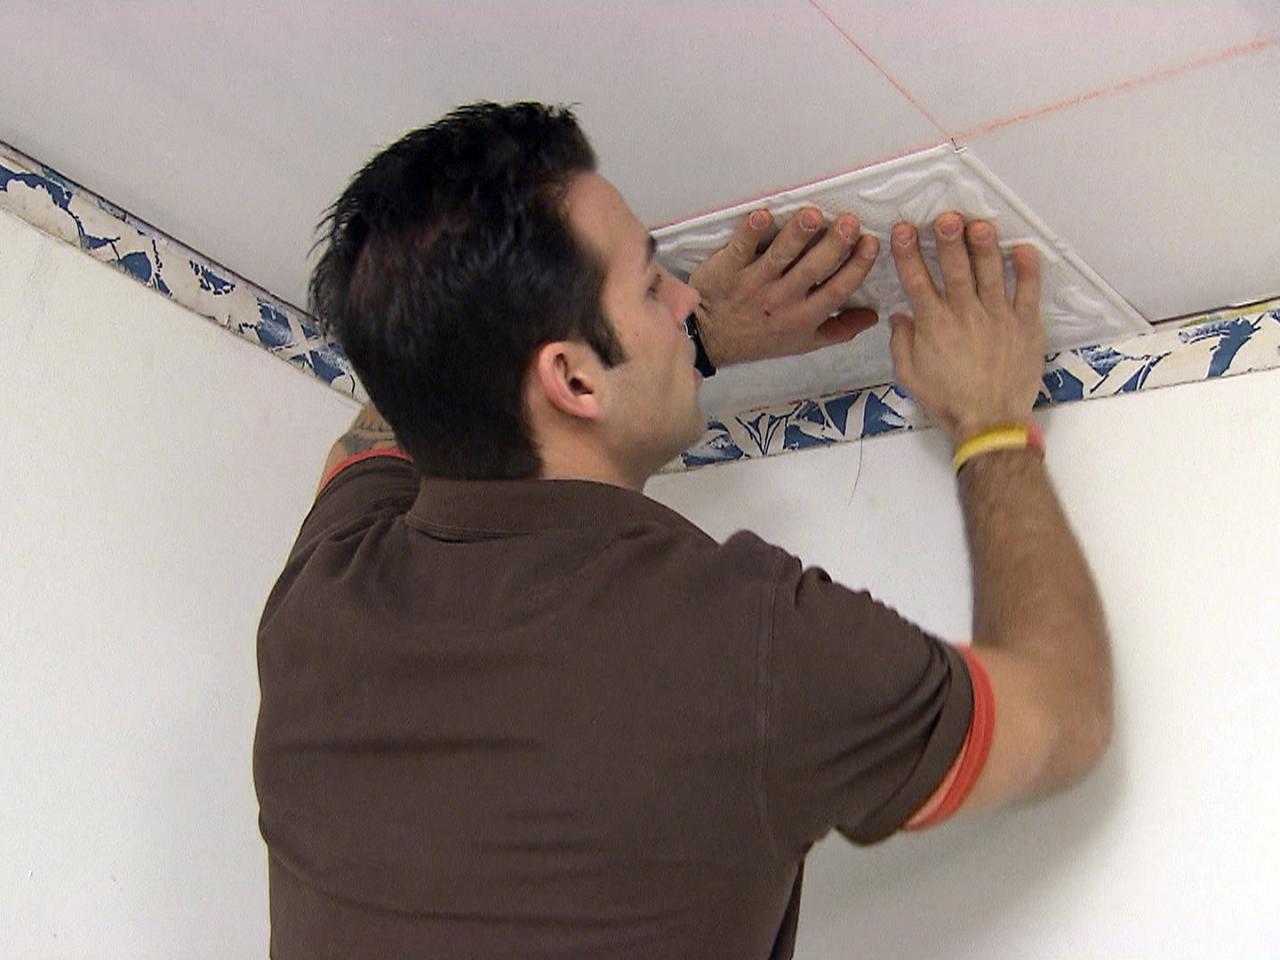 How To Install A Tin Tile Ceiling, Metal Ceiling Tiles Installation Guide